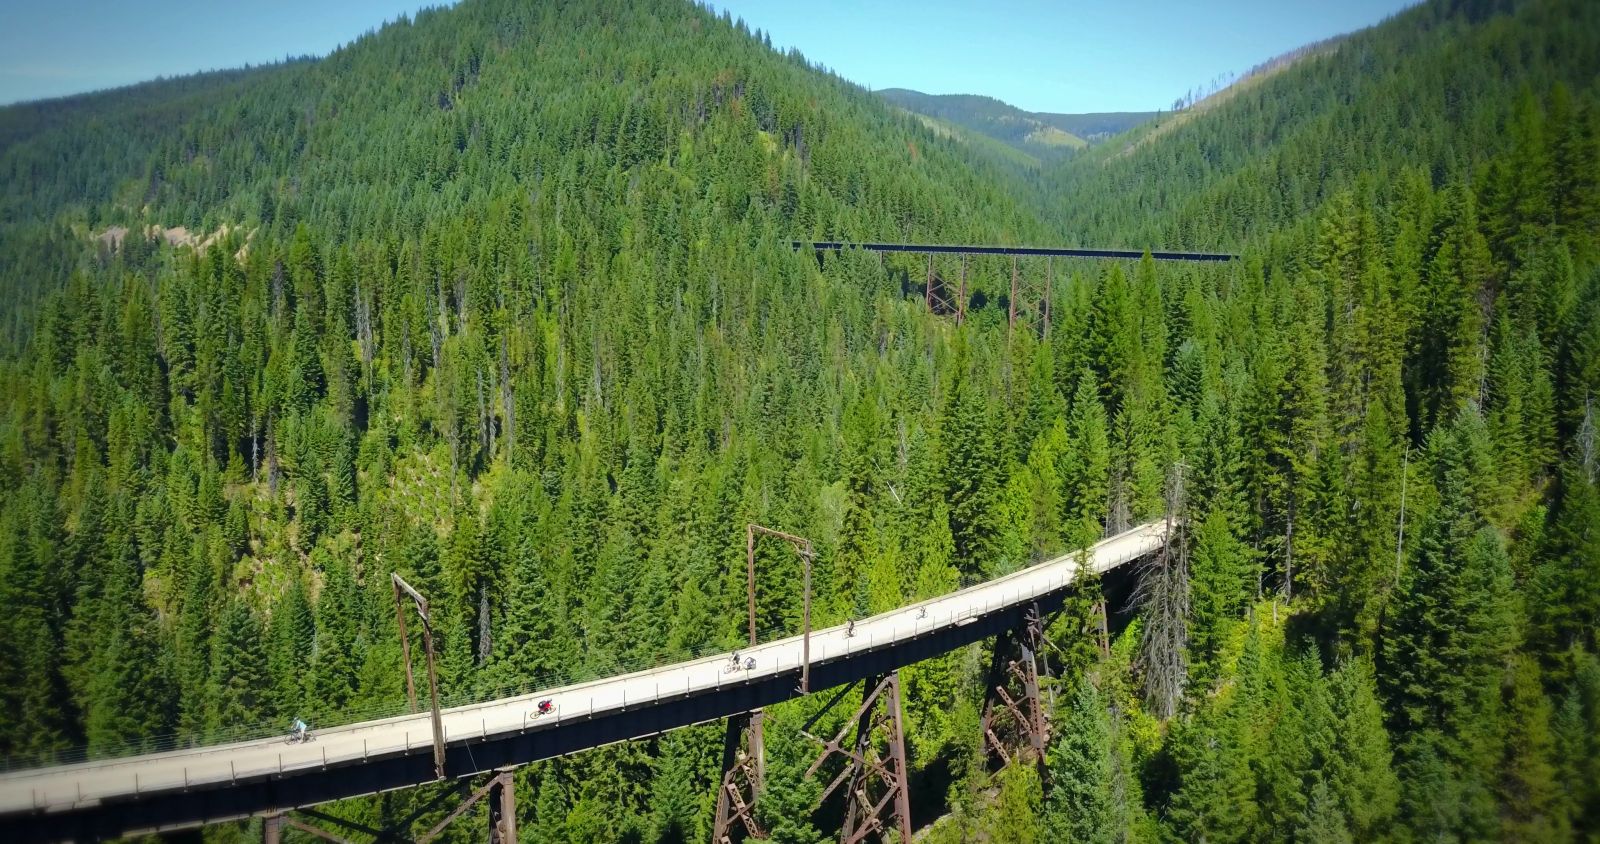 If you look close you will see the signature Red Jersey of a bike Patroller riding across the first trestle in this picture below.